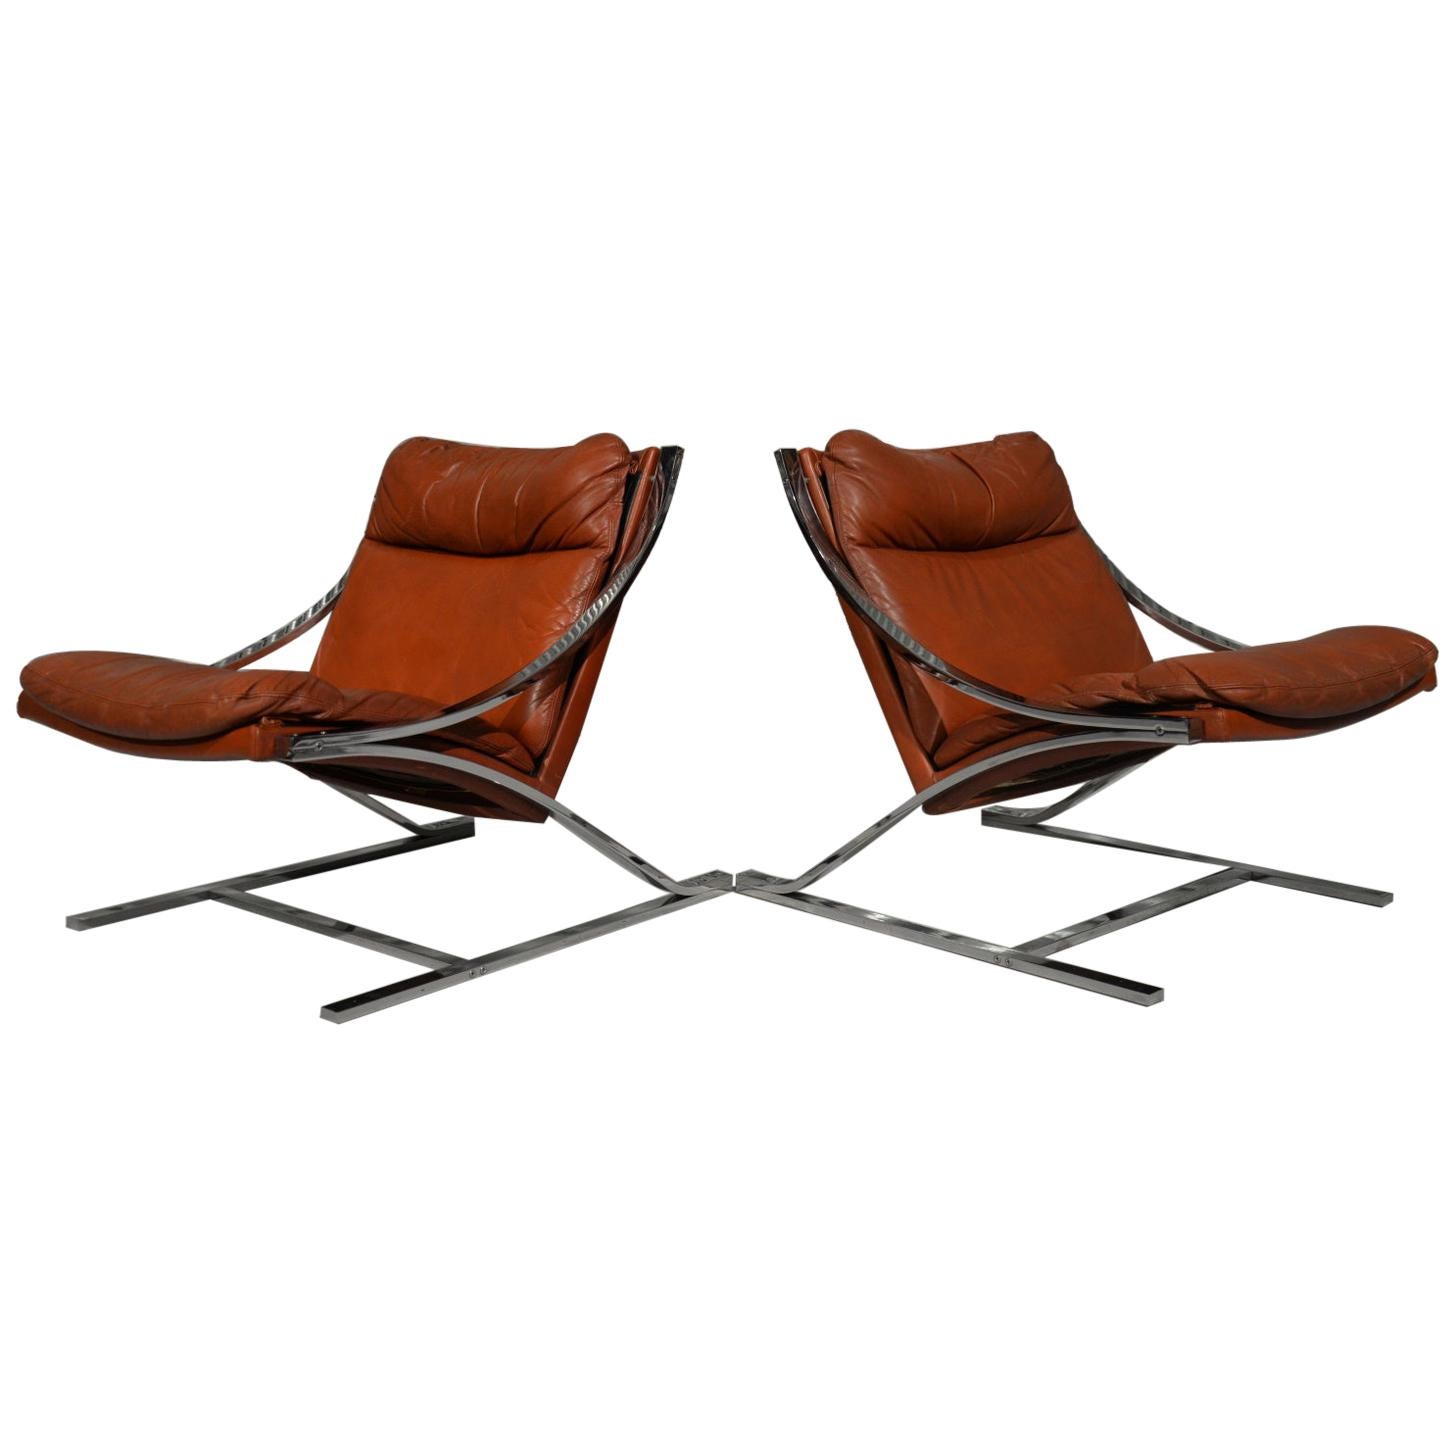 Paul Tuttle "Zeta" Lounge Chairs for Strassle of Switzerland, 1968 For Sale